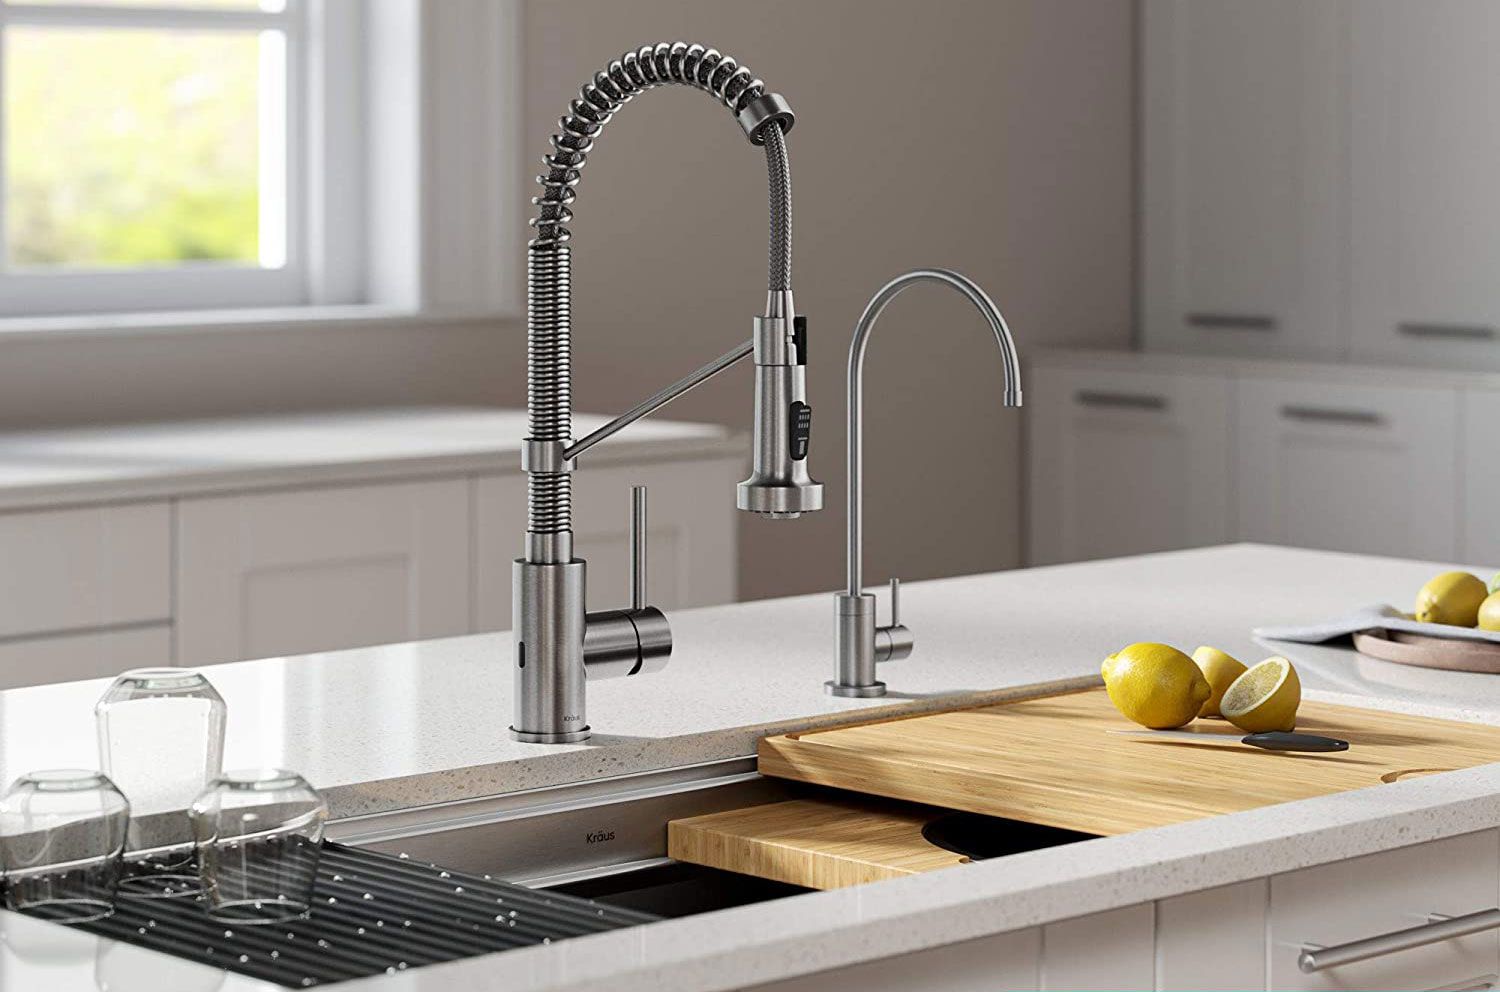 The 8 Best Touchless Kitchen Faucets, What Company Makes The Best Kitchen Faucet